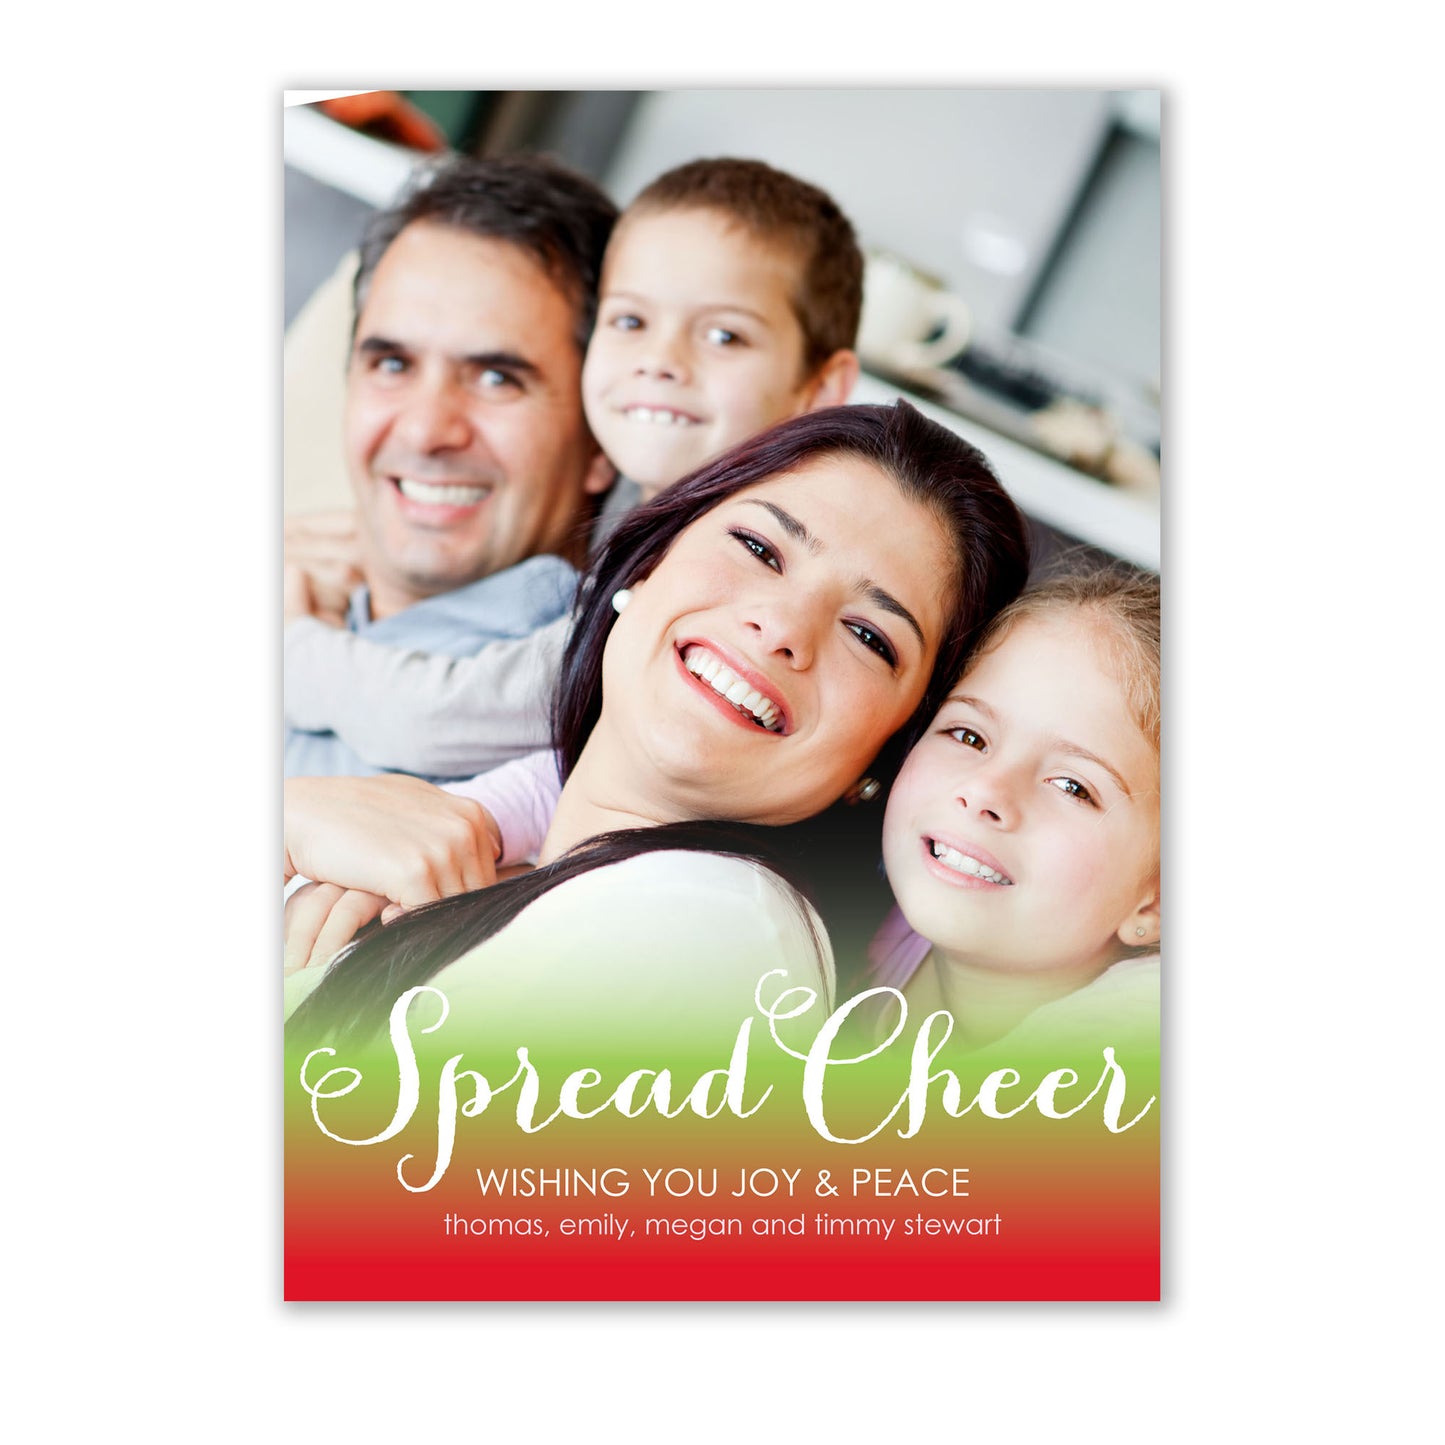 Spread cheer with a Noteworthy Spread Cheer Holiday Ombre Photo Card. Complete with white unlined envelopes, this card is the perfect way to send warm wishes to loved ones during the holiday season.